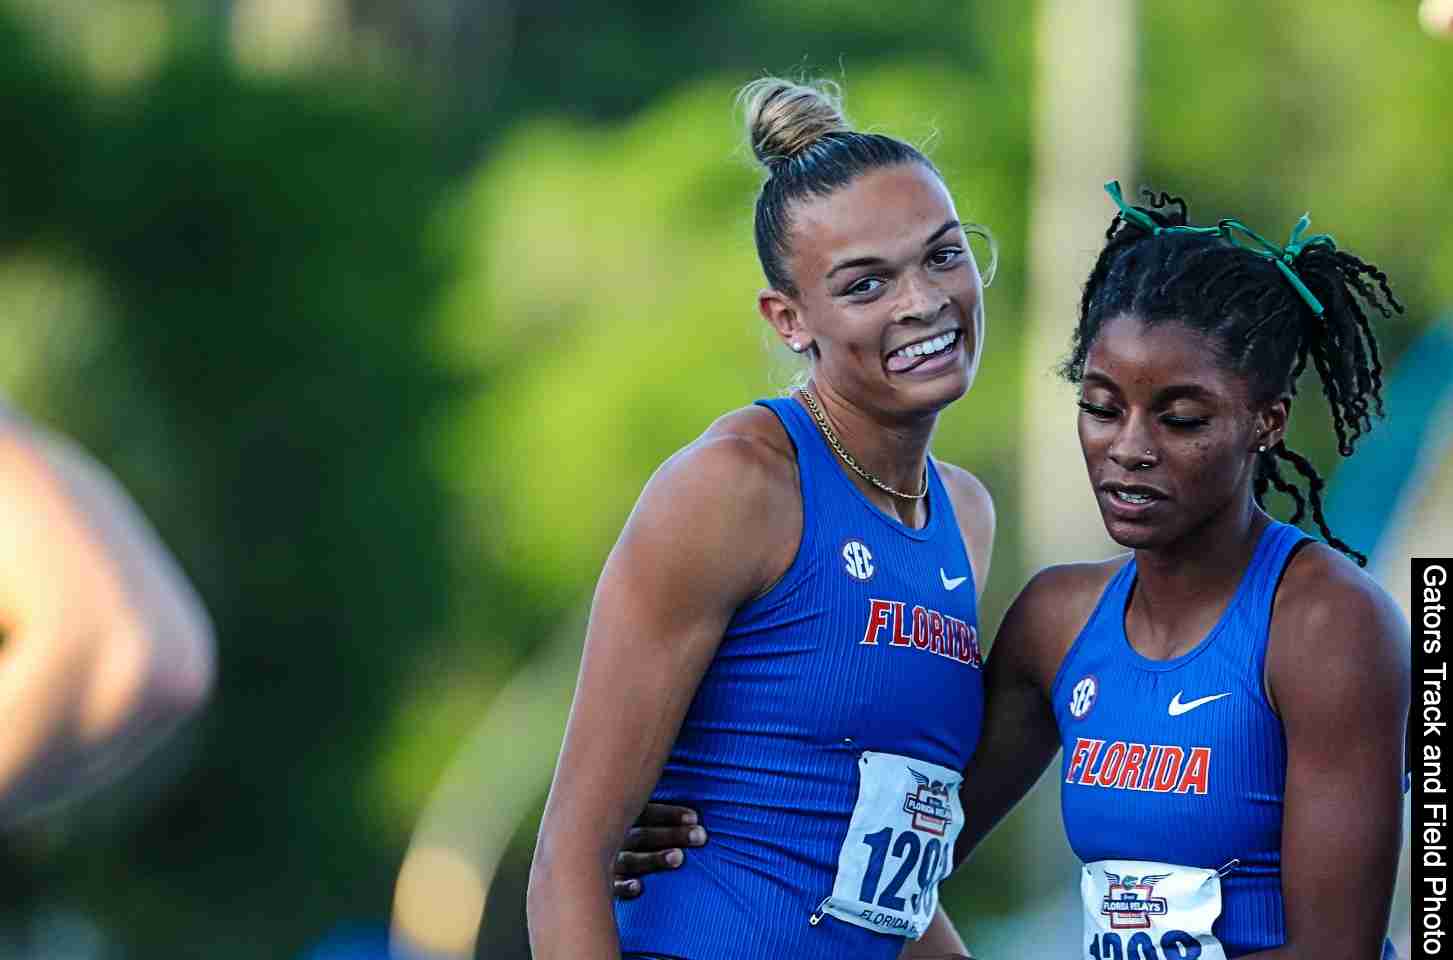 Anna-Hall-wins-400m-hurdles-at-2022-Florida-Relays-with-record-time